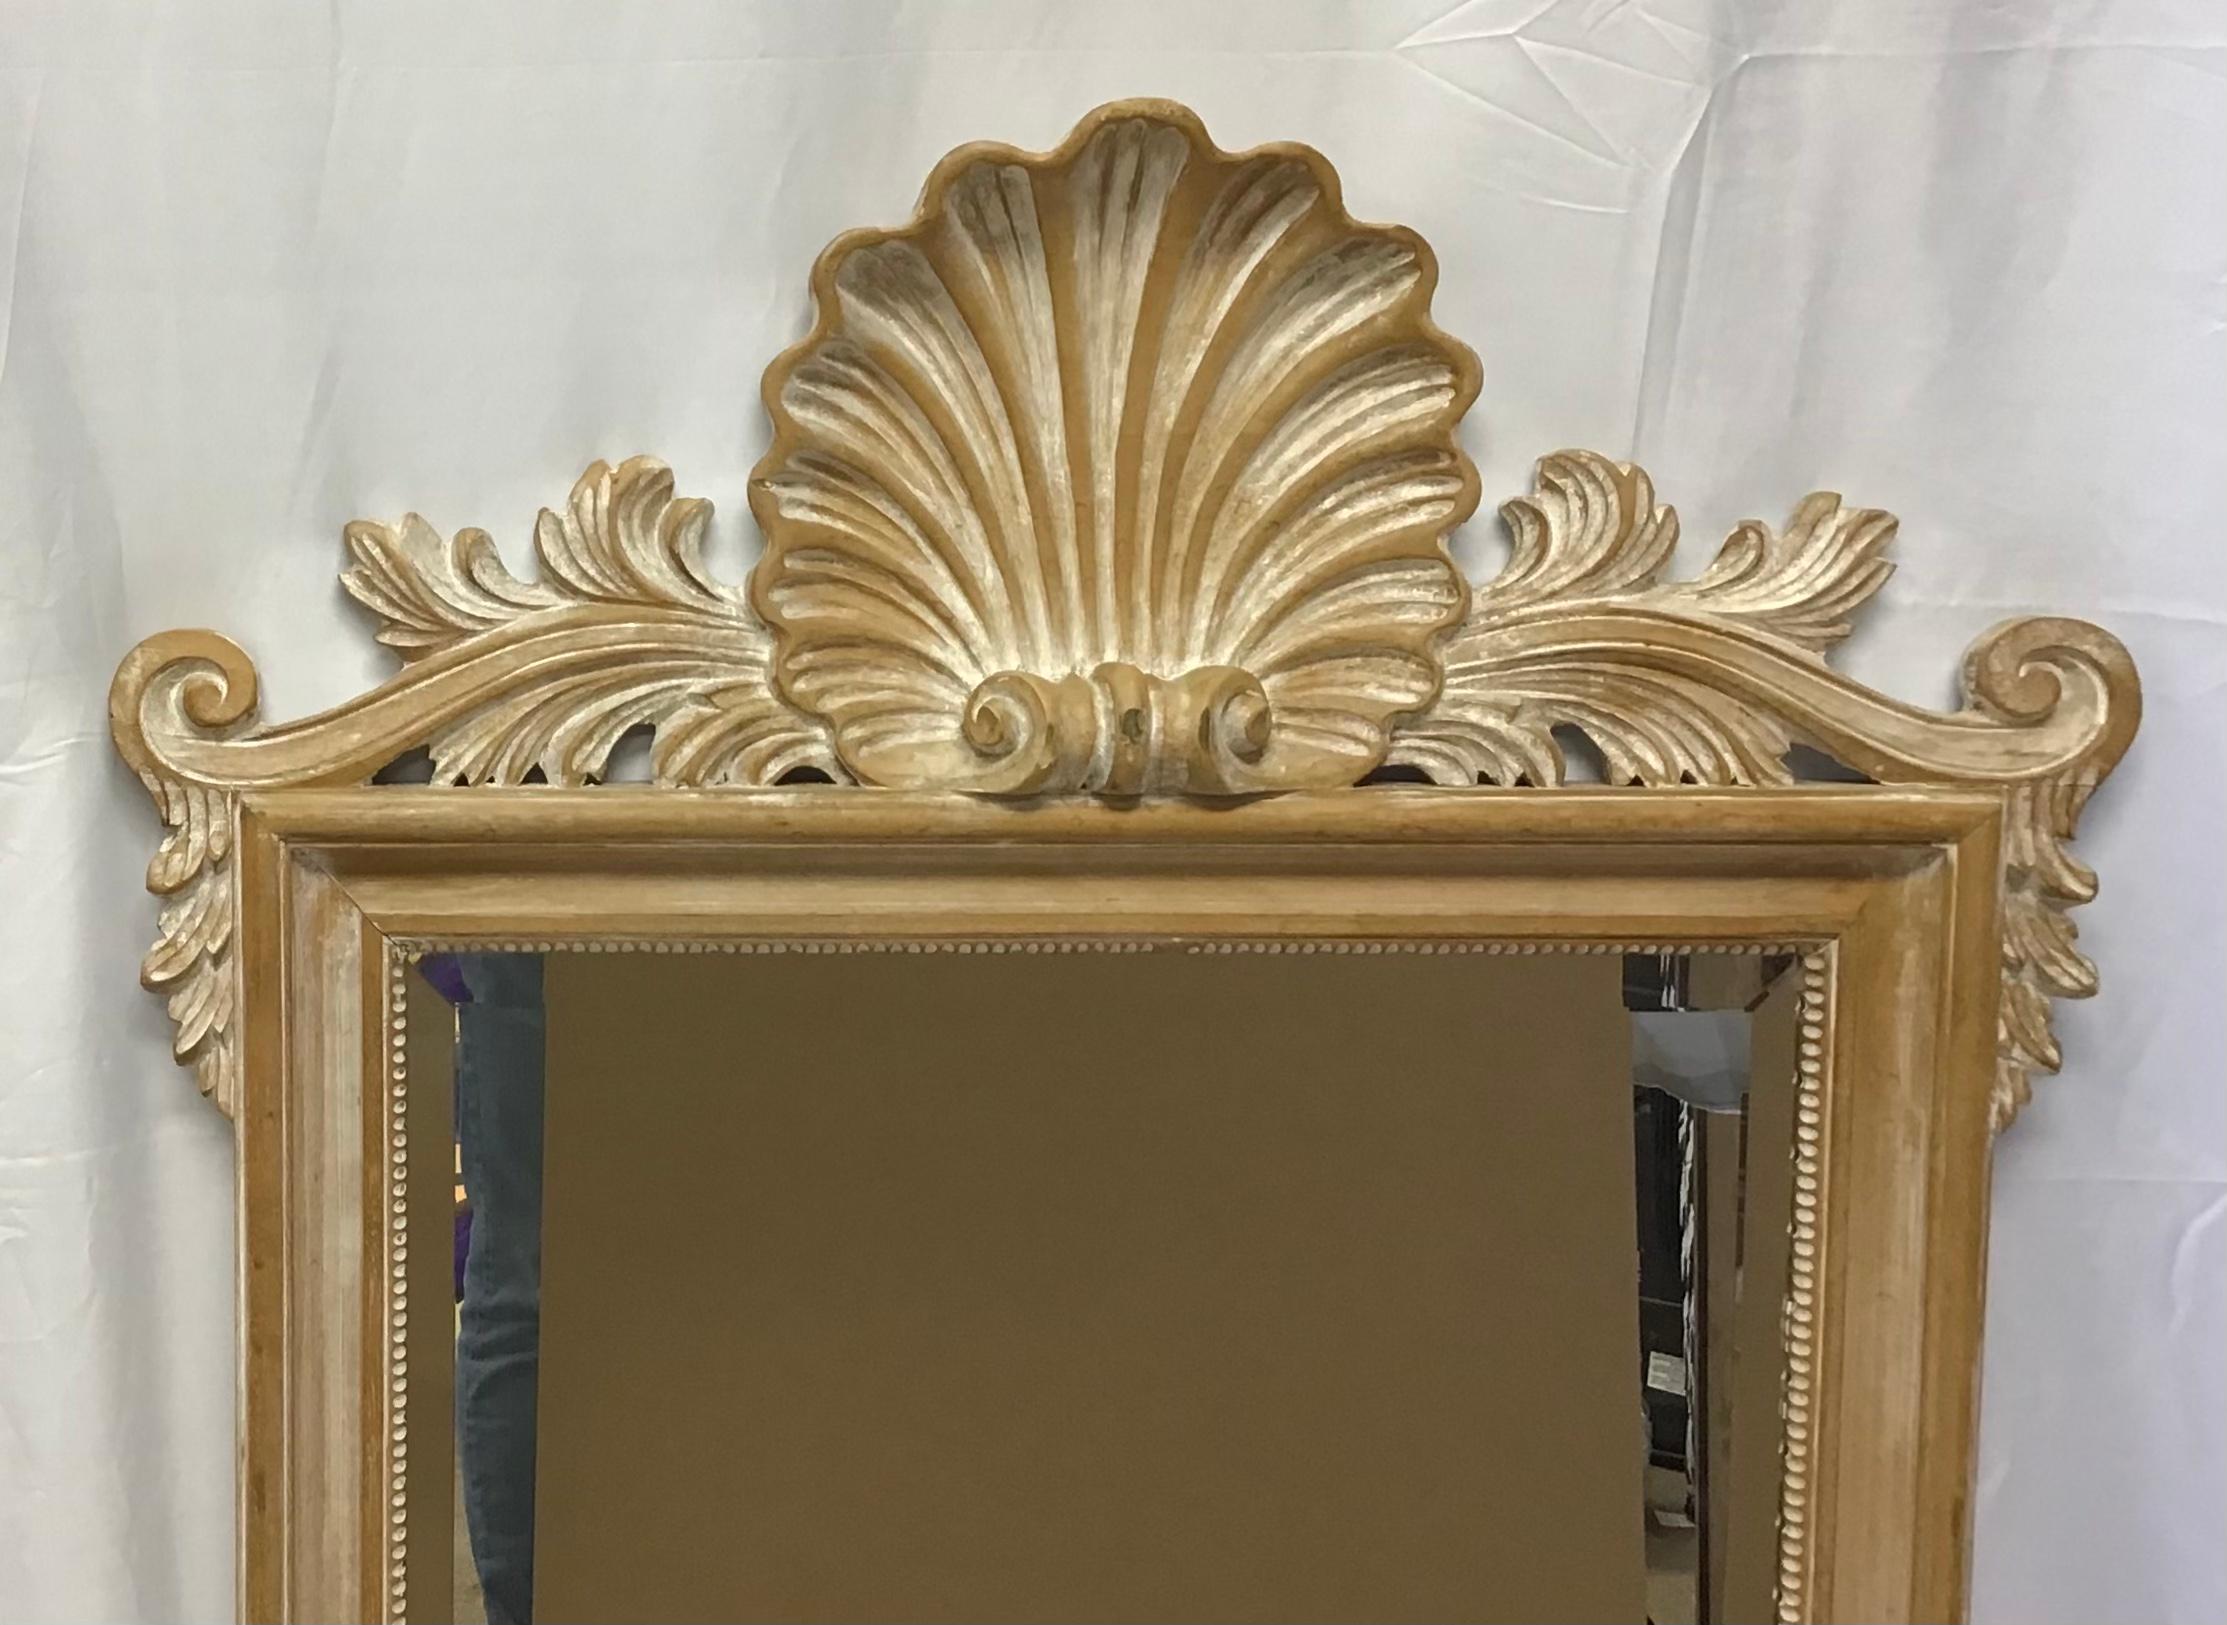 Lovely vintage, all wood carved, seashell shell wall mirror. Marked on back made in Italy by LaBarge. Highlighted in a white wash finish.